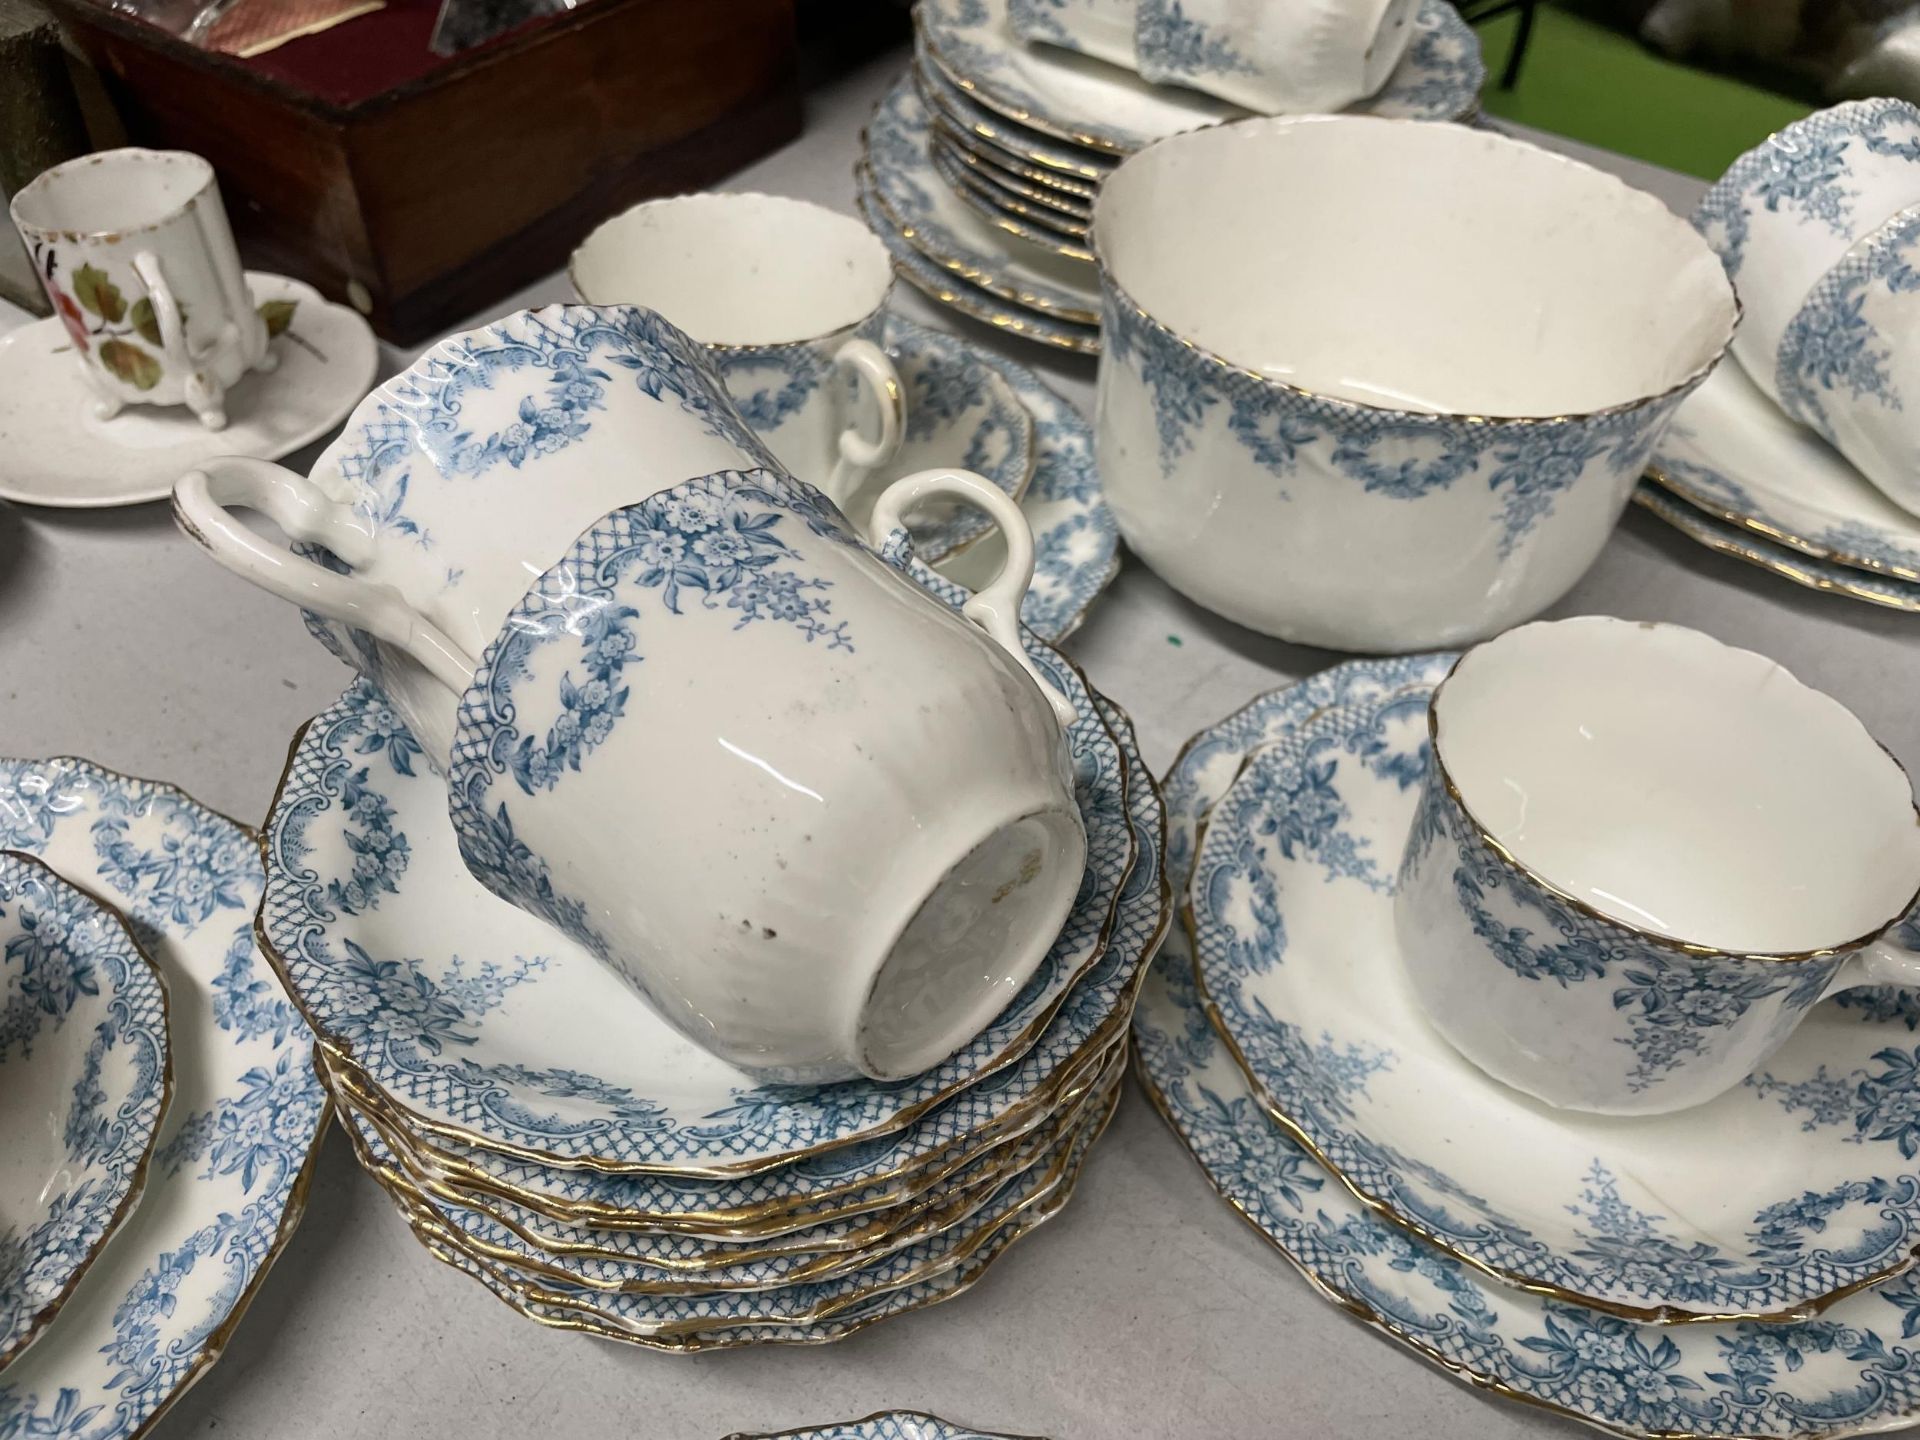 A QUANTITY OF BLUE AND WHITE CHINA TO INCLUDE CUPS, SAUCERS, SIDE PLATES, SUGAR BOWL, ETC - Image 2 of 2